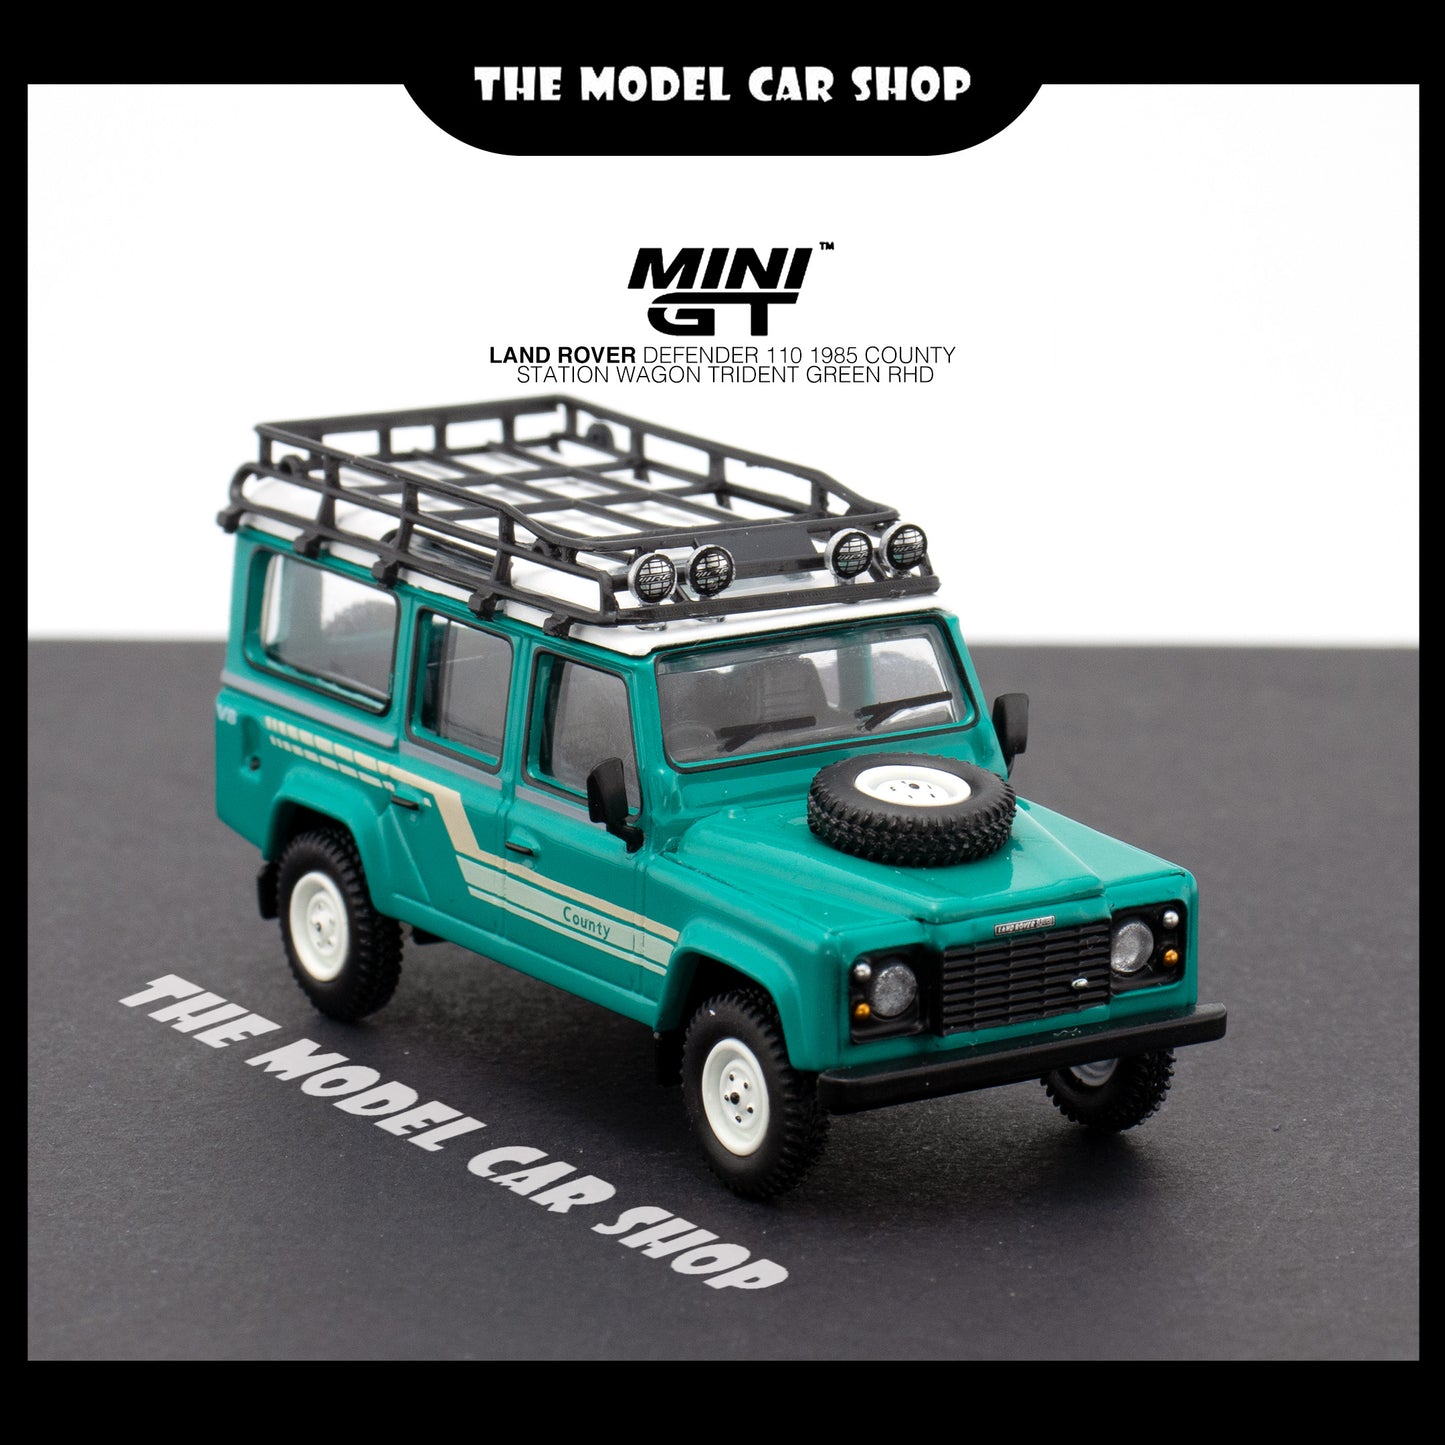 [MINI GT] Land Rover Defender 110 1985 County Station Wagon - Trident Green